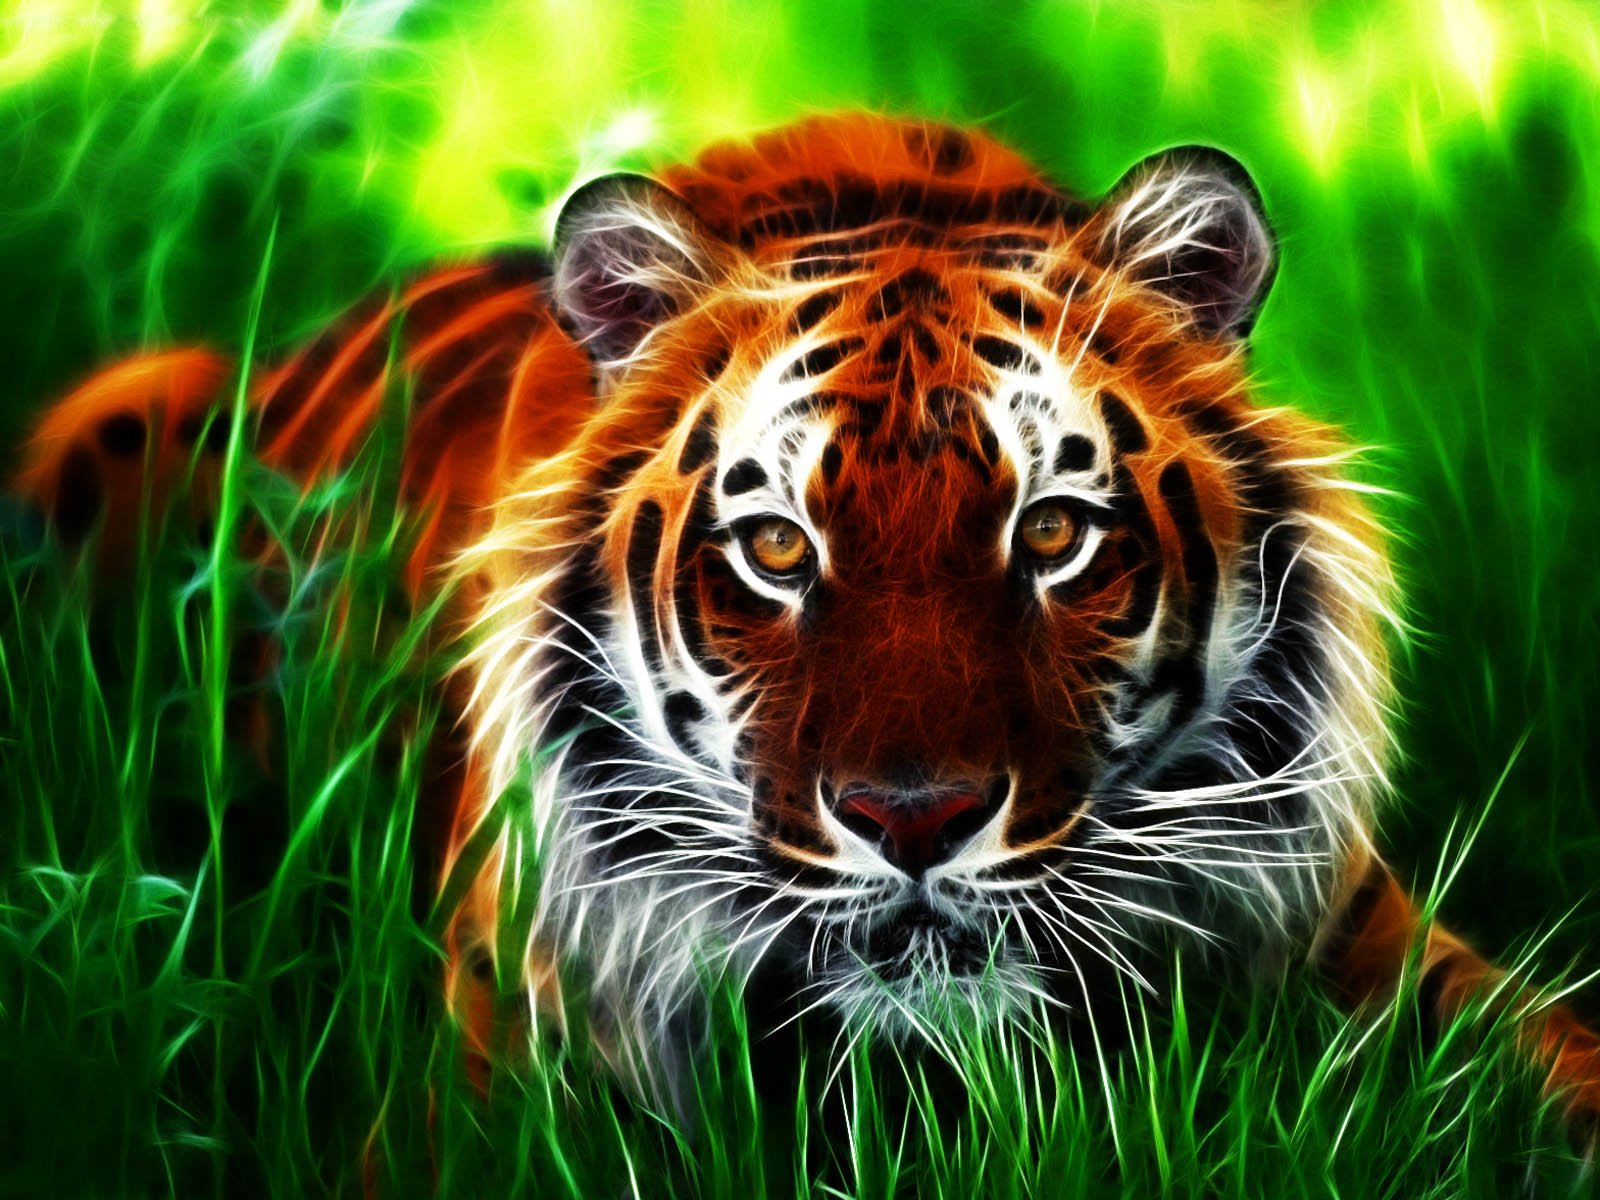  Tiger 3D Wallpapers Images Photos Pictures and Backgrounds for free